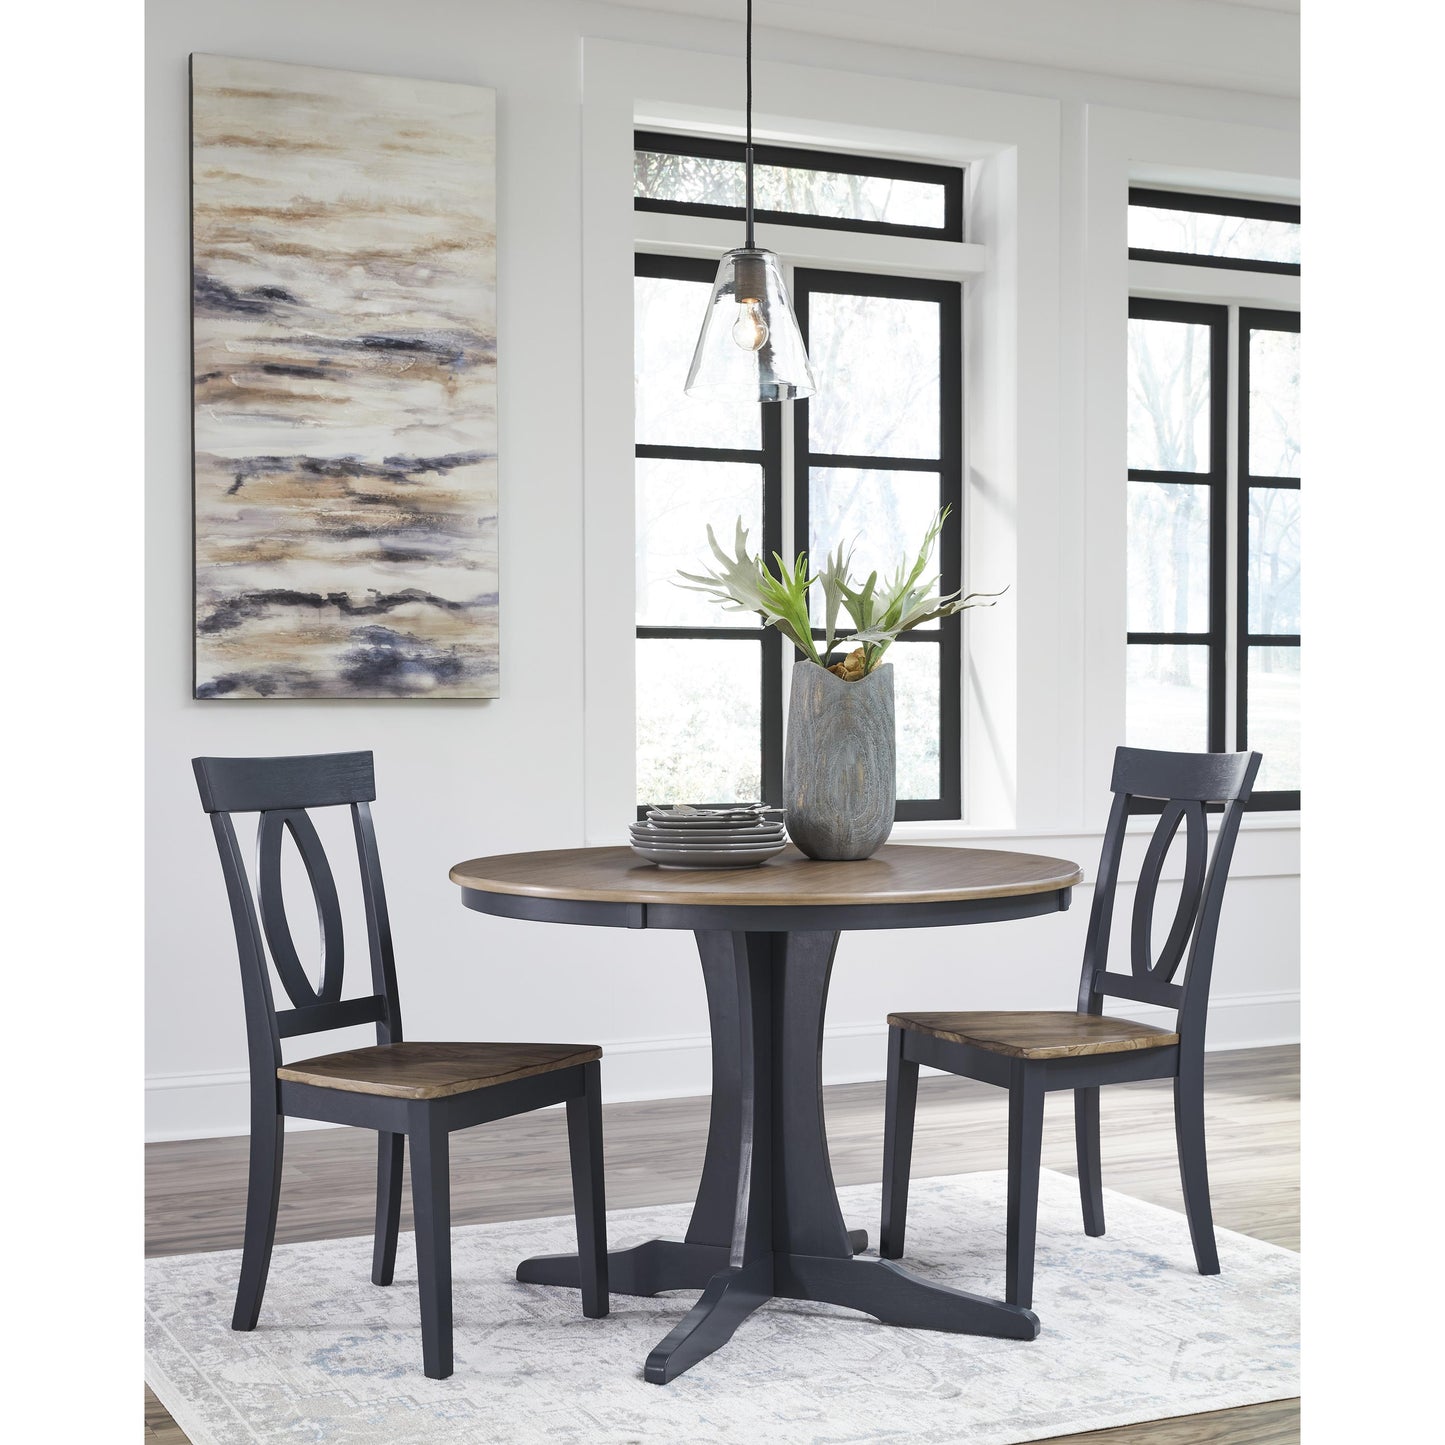 Signature Design by Ashley Round Landocken Dining Table with Pedestal Base D502-15 IMAGE 5